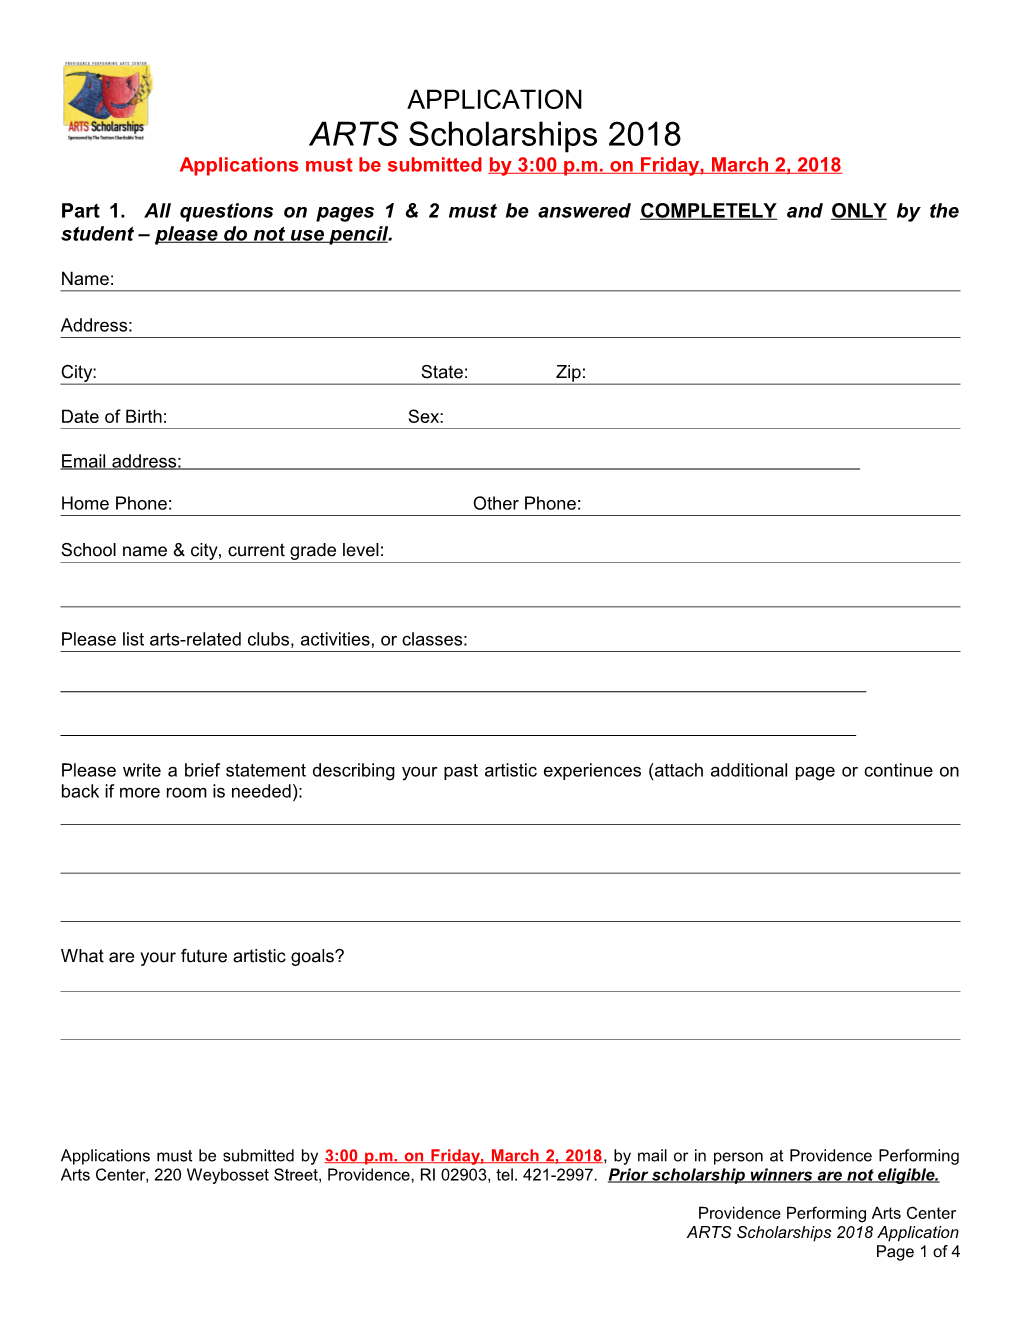 Application Must Be Received by January 19, 1997, by Mail Or in Person at PPAC, 220 Weybosset